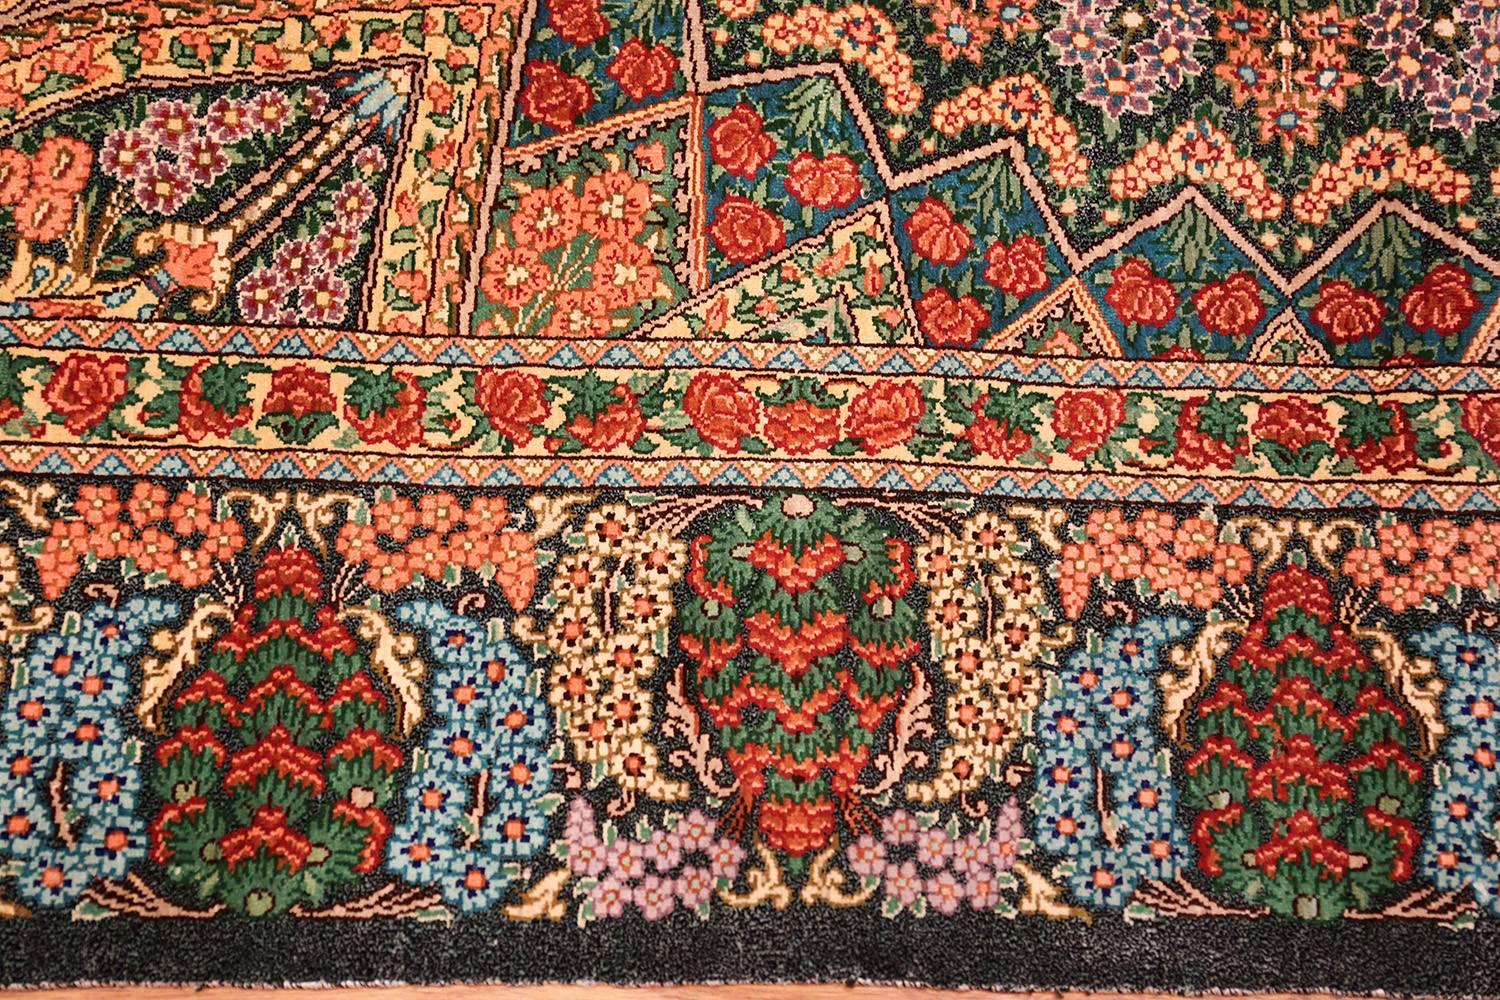 Green Background Silk Persian Qum Rug. Size: 3 ft 4 in x 5 ft (1.02 m x 1.52 m) 1